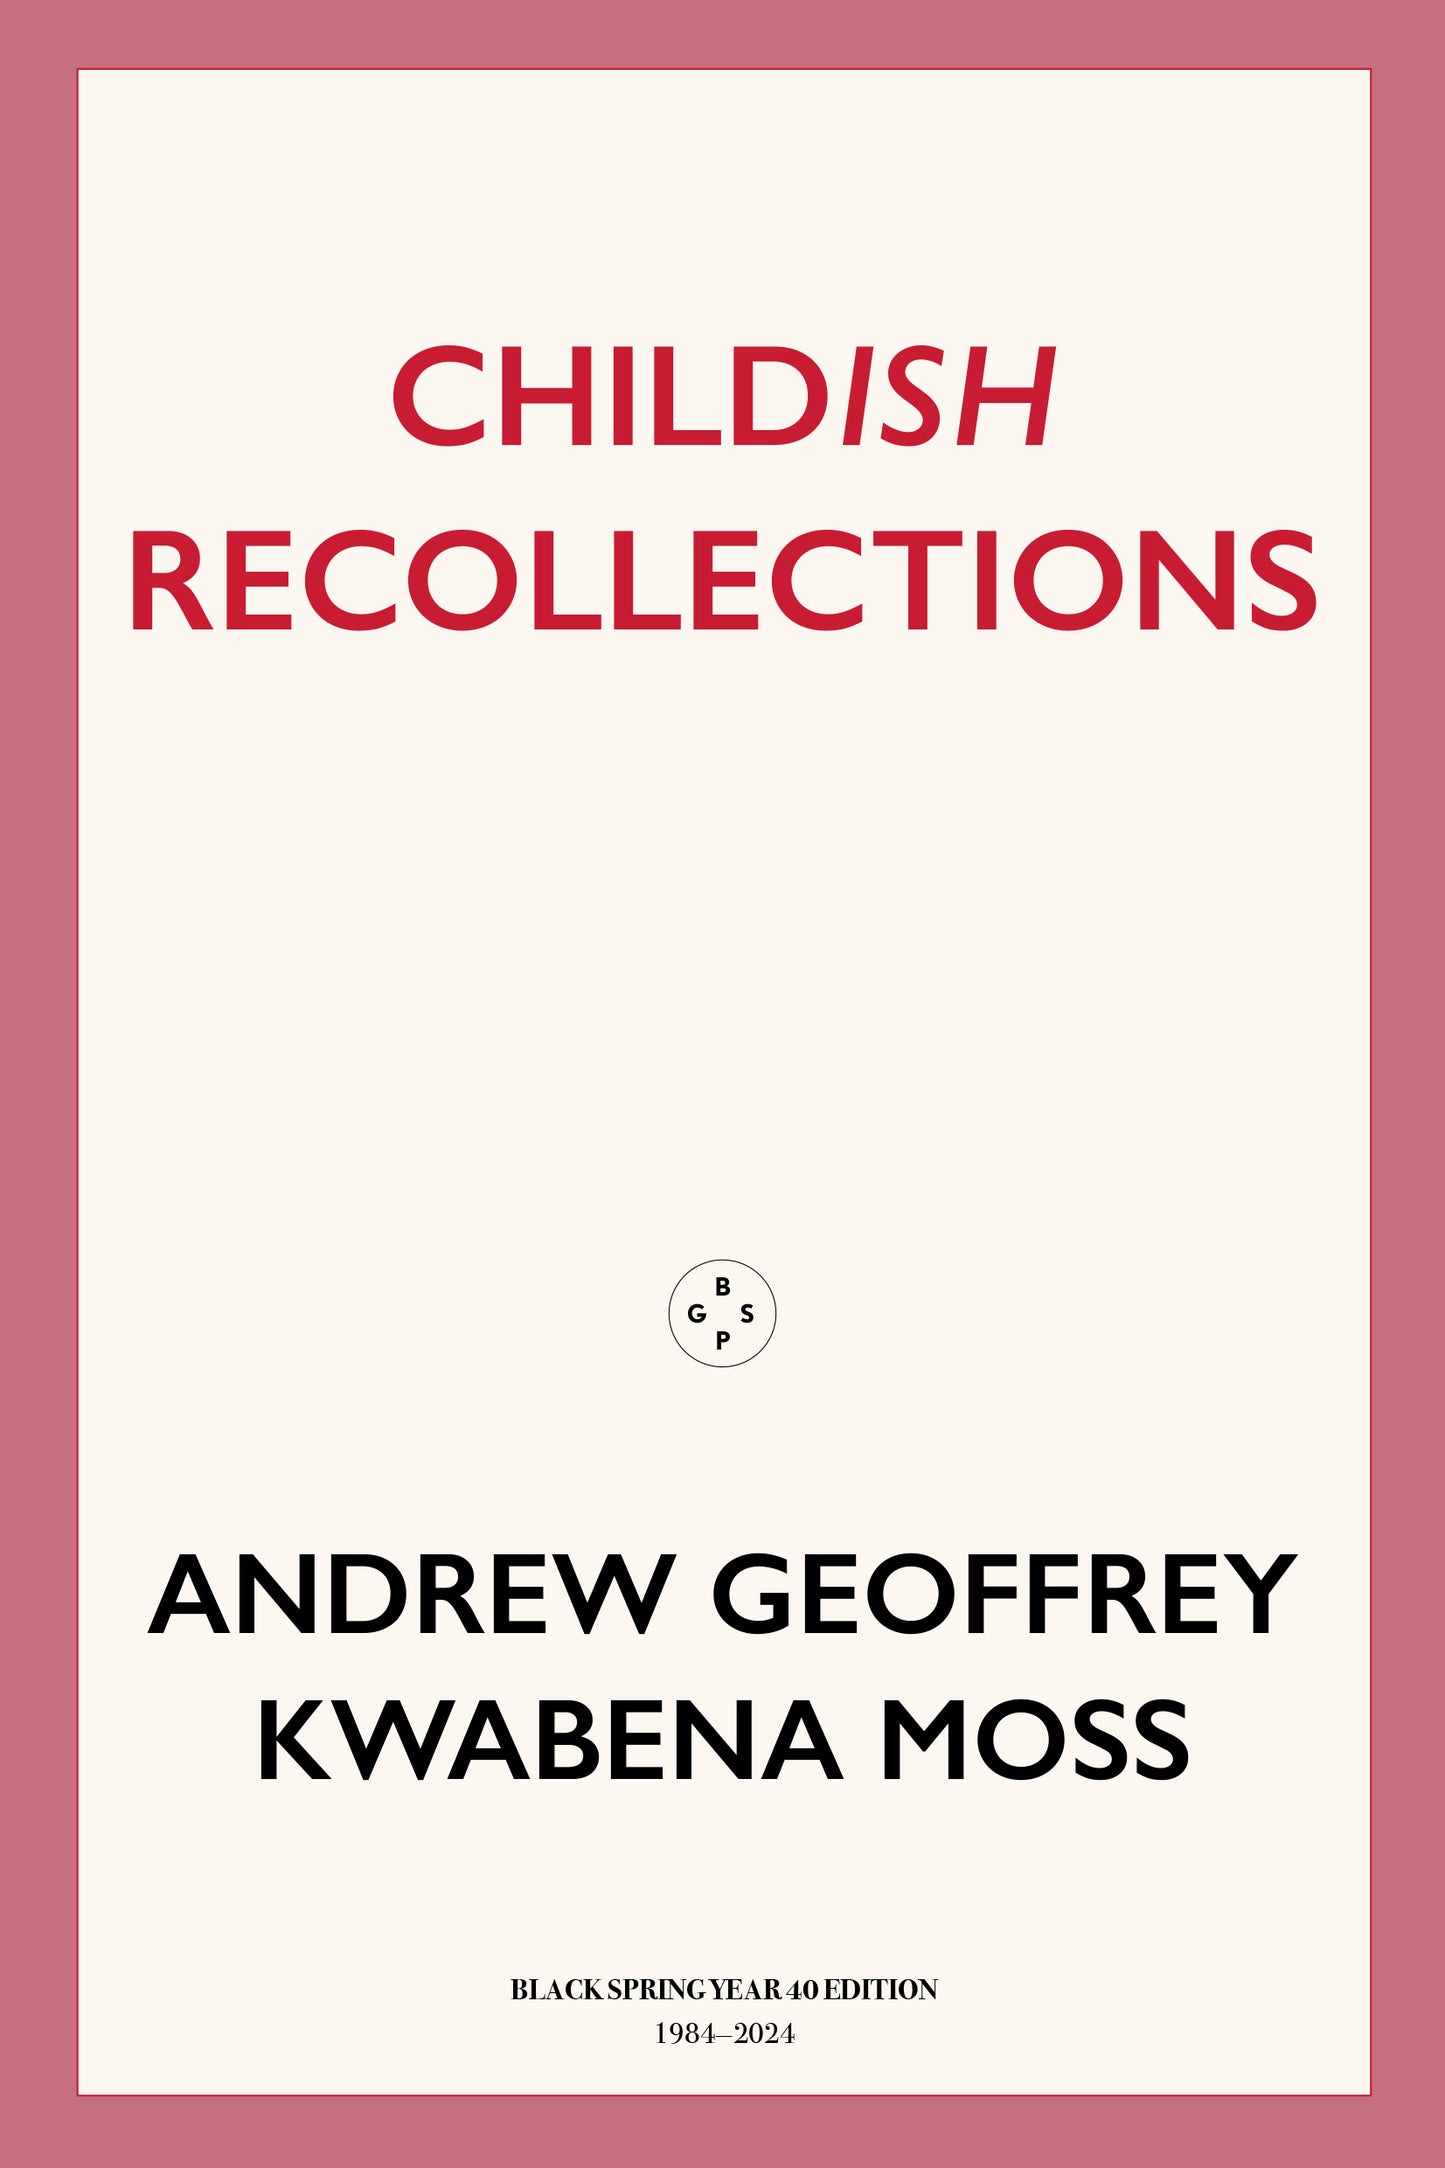 Childish Recollections